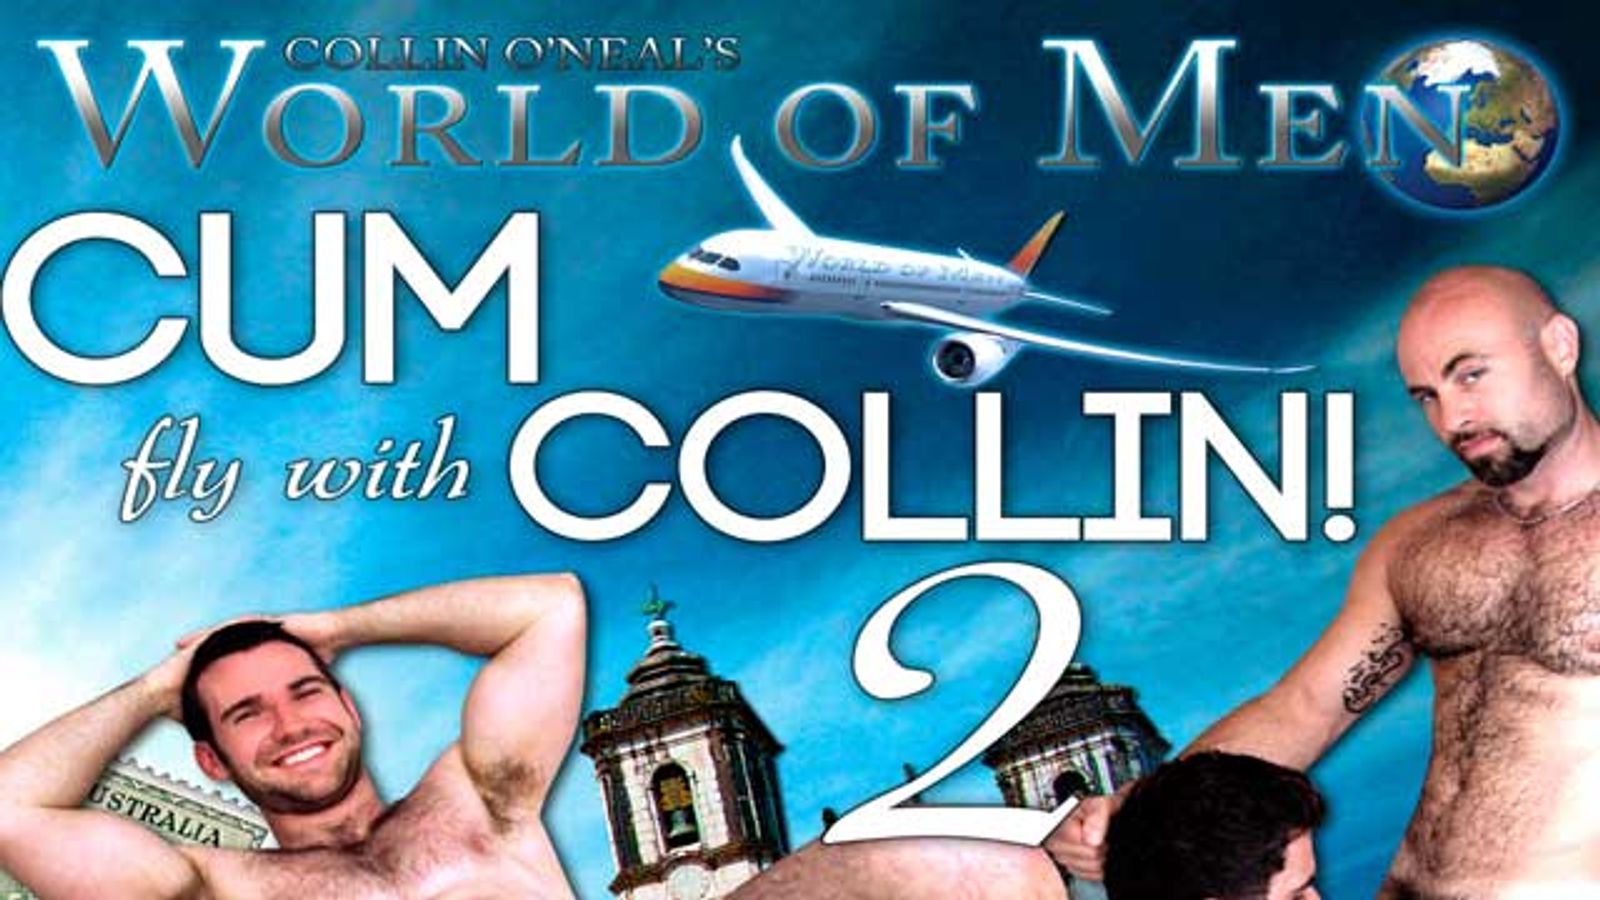 CollinOneal.com Releases ‘Cum Fly With Collin 2’